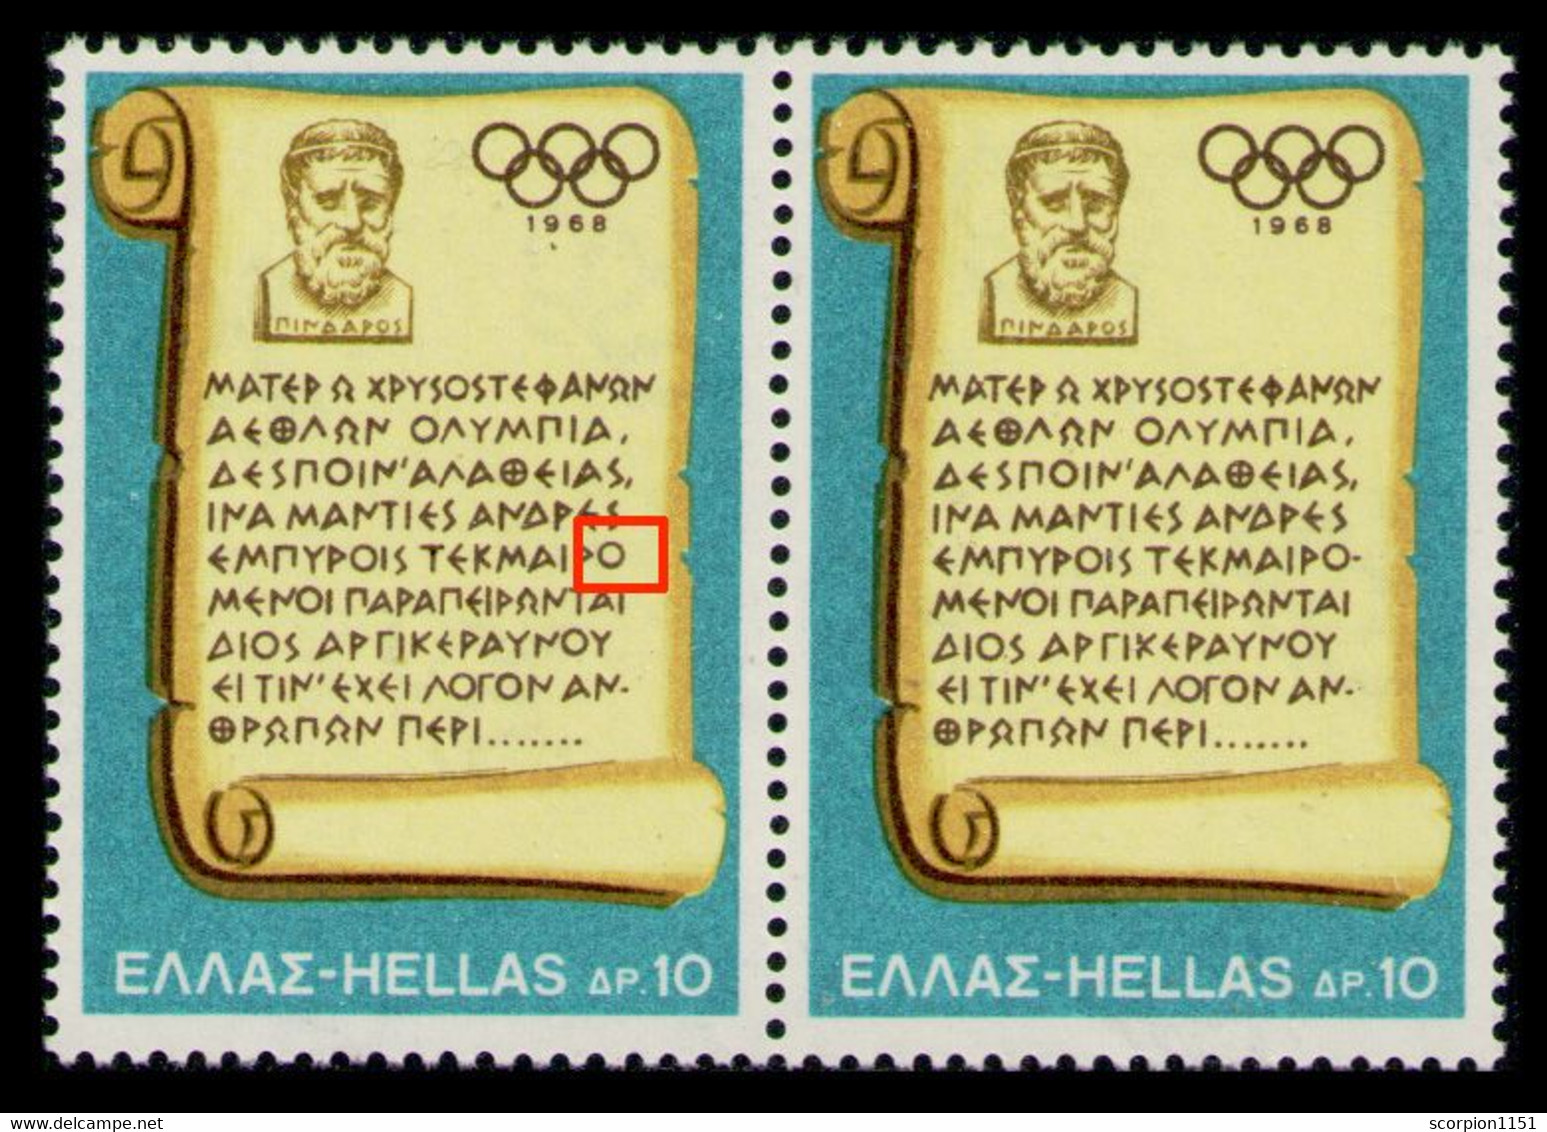 GREECE 1968 - ERROR No Dash After "O" At The Left Stamp RR In Pair - MNH** - Ongebruikt